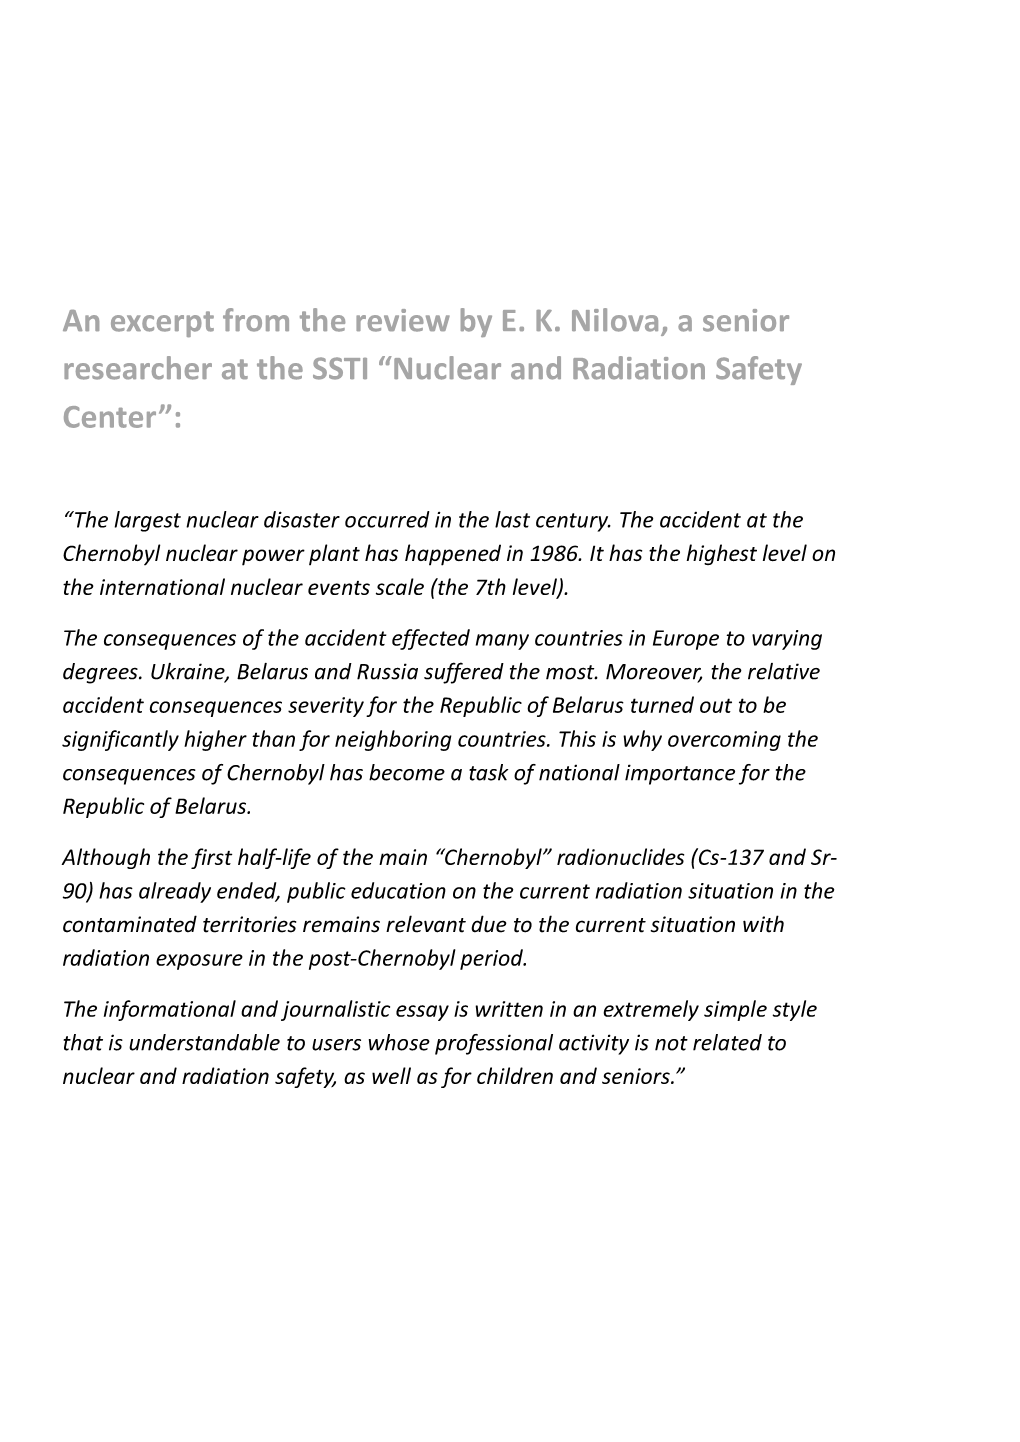 An Excerpt from the Review by E. K. Nilova, a Senior Researcher at the SSTI “Nuclear and Radiation Safety Center”